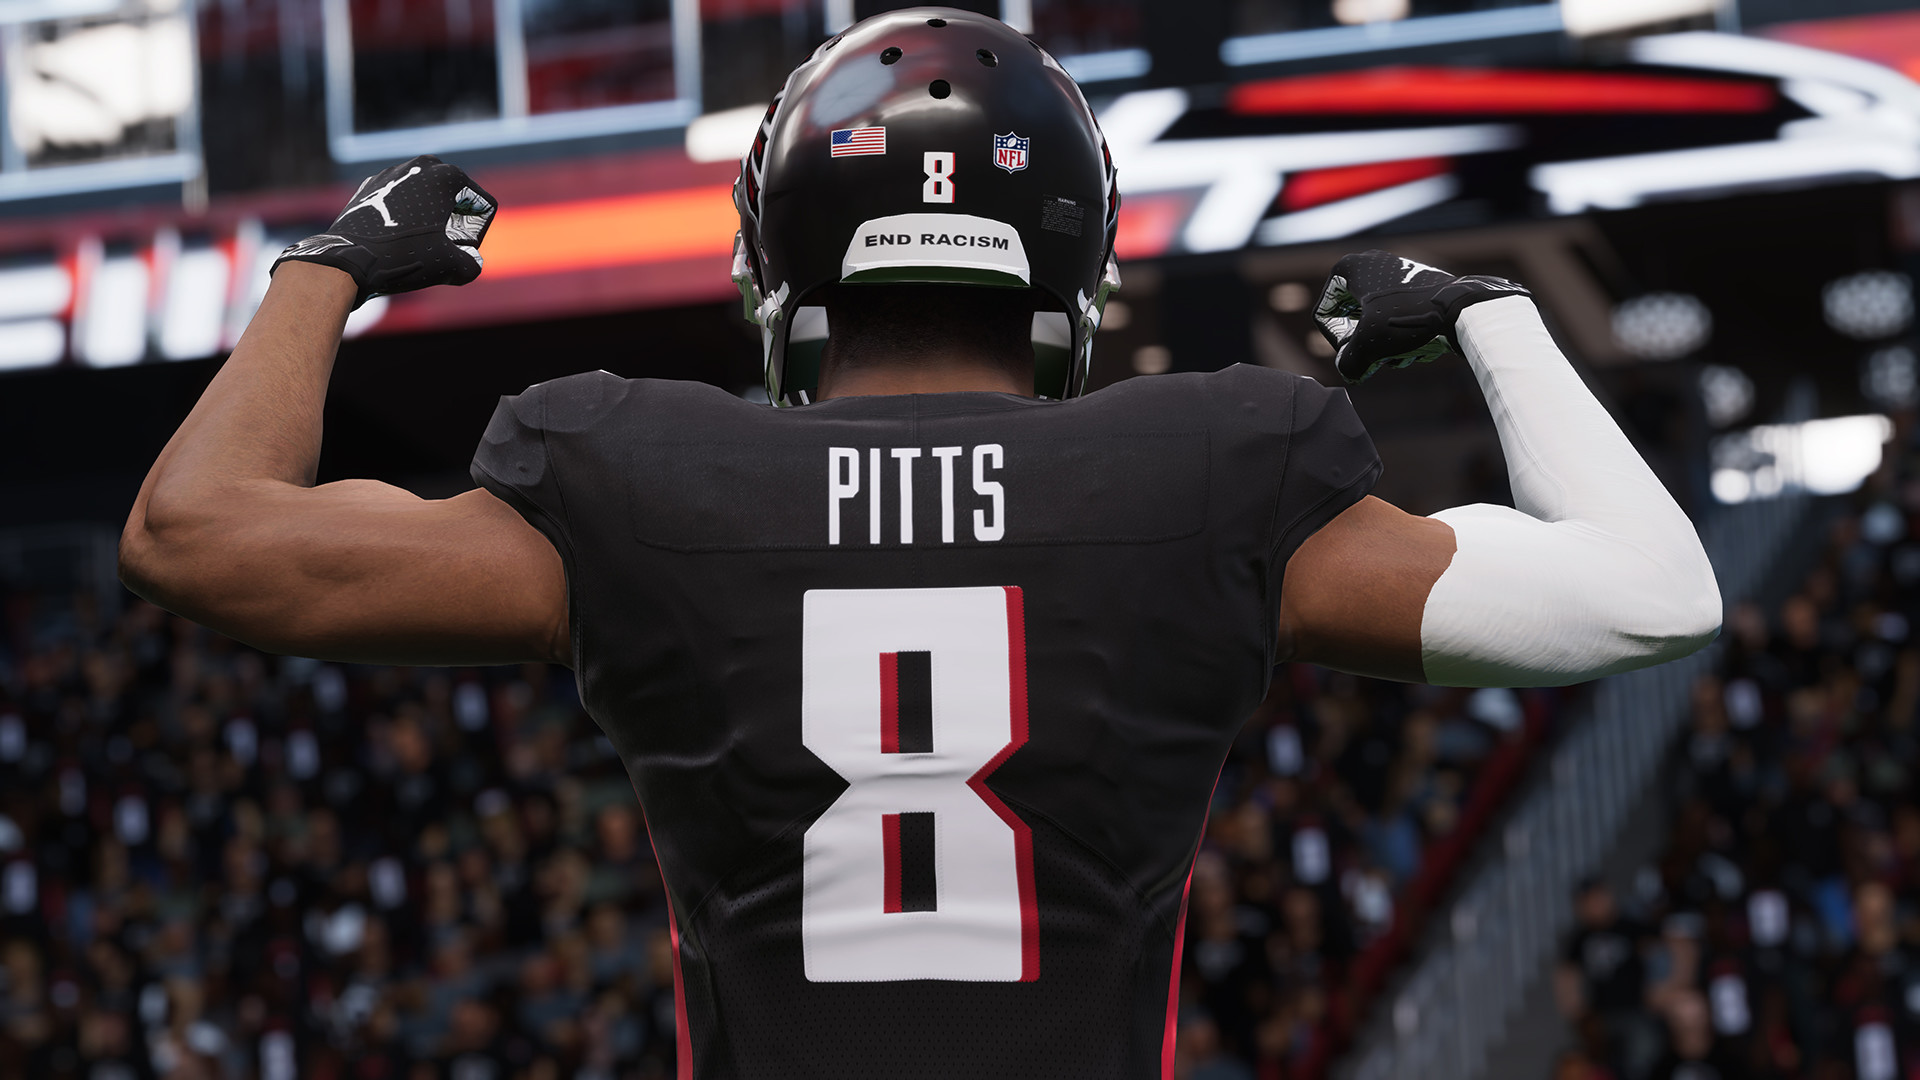 Madden NFL 22 PlayStation 4 Account Pixelpuffin.net Activation Link